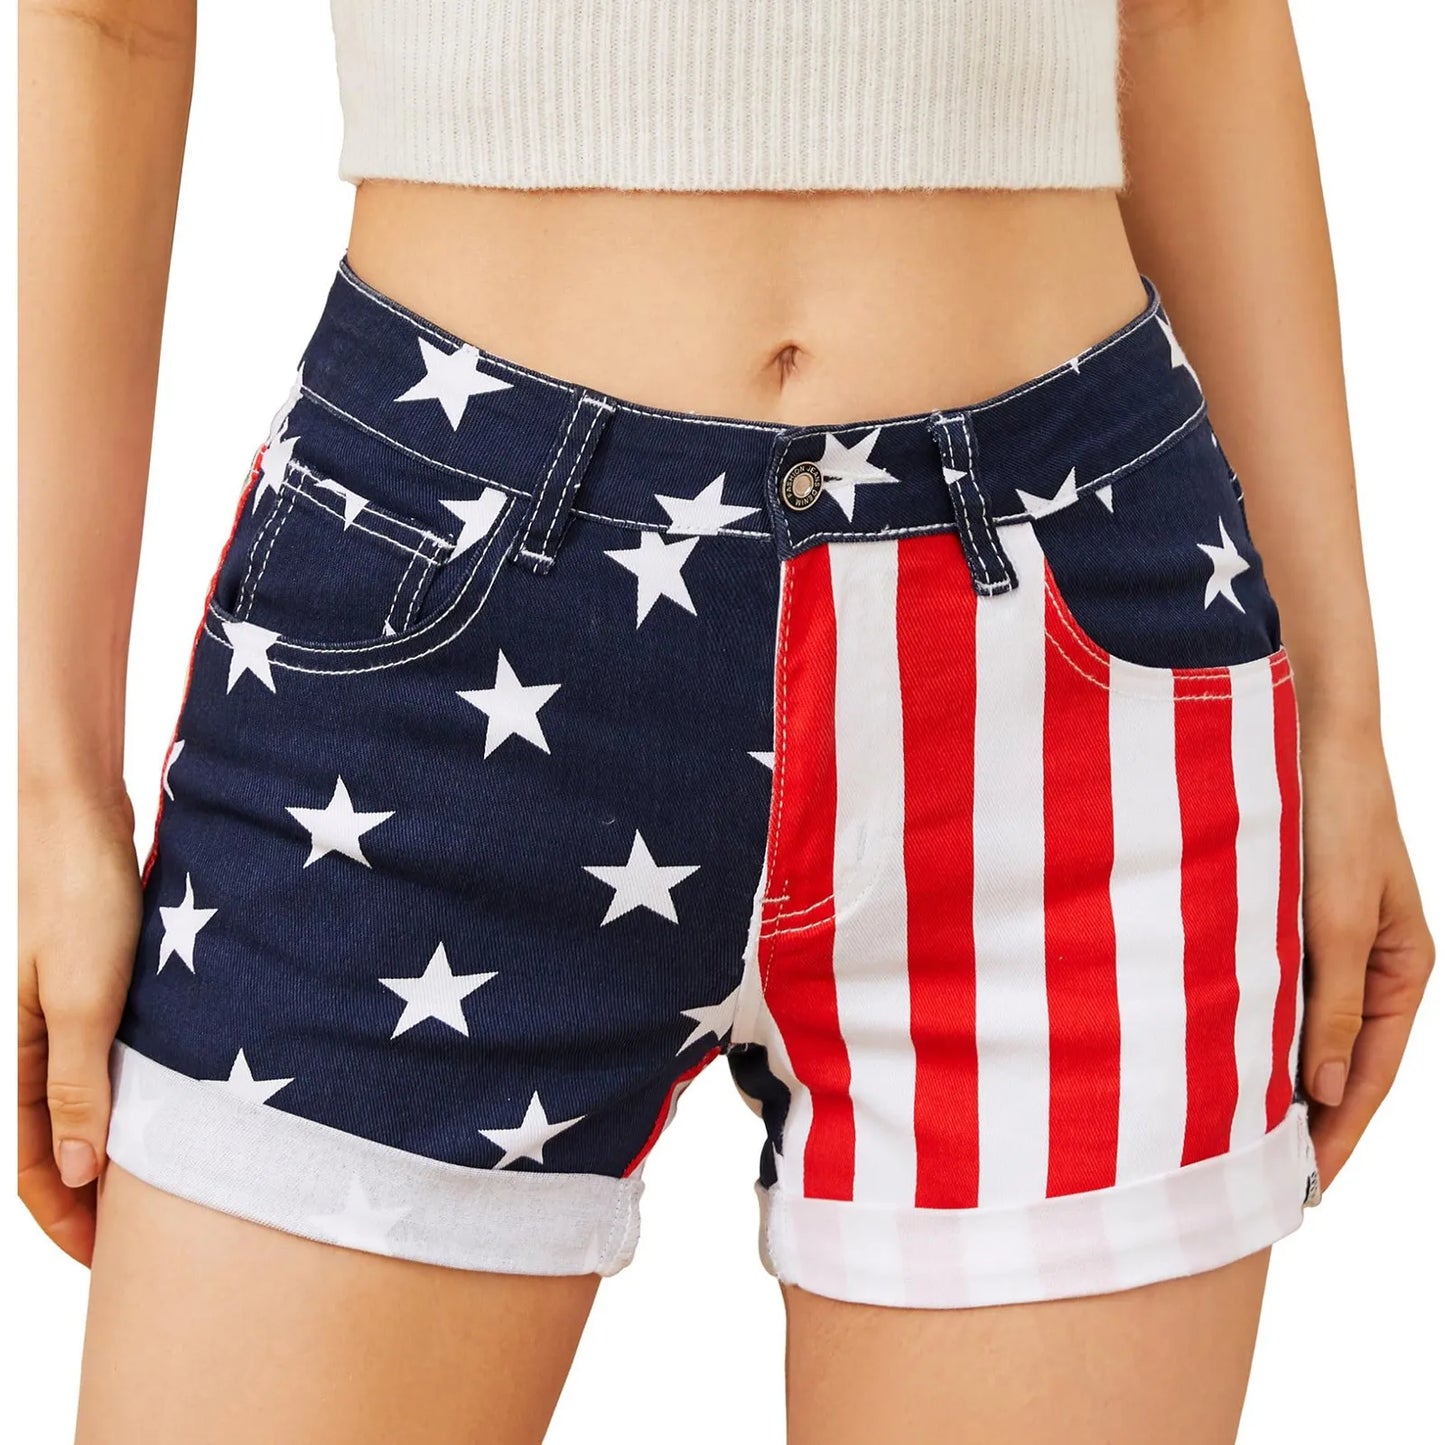 High Waist Stars and Stripes Shorts Sunset and Swim Red/White/Blue M 